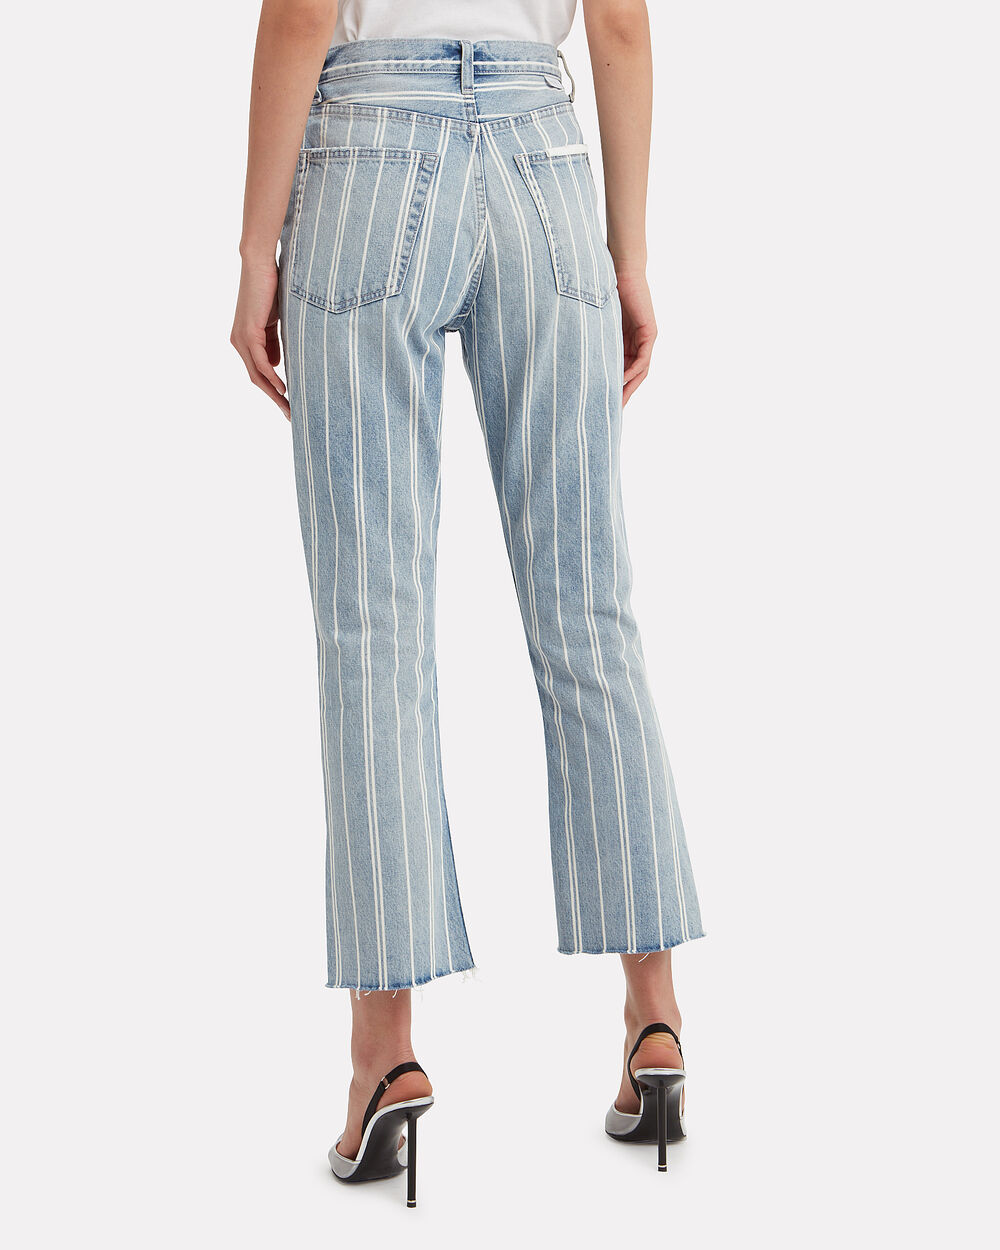 The Darcy Cropped Jeans